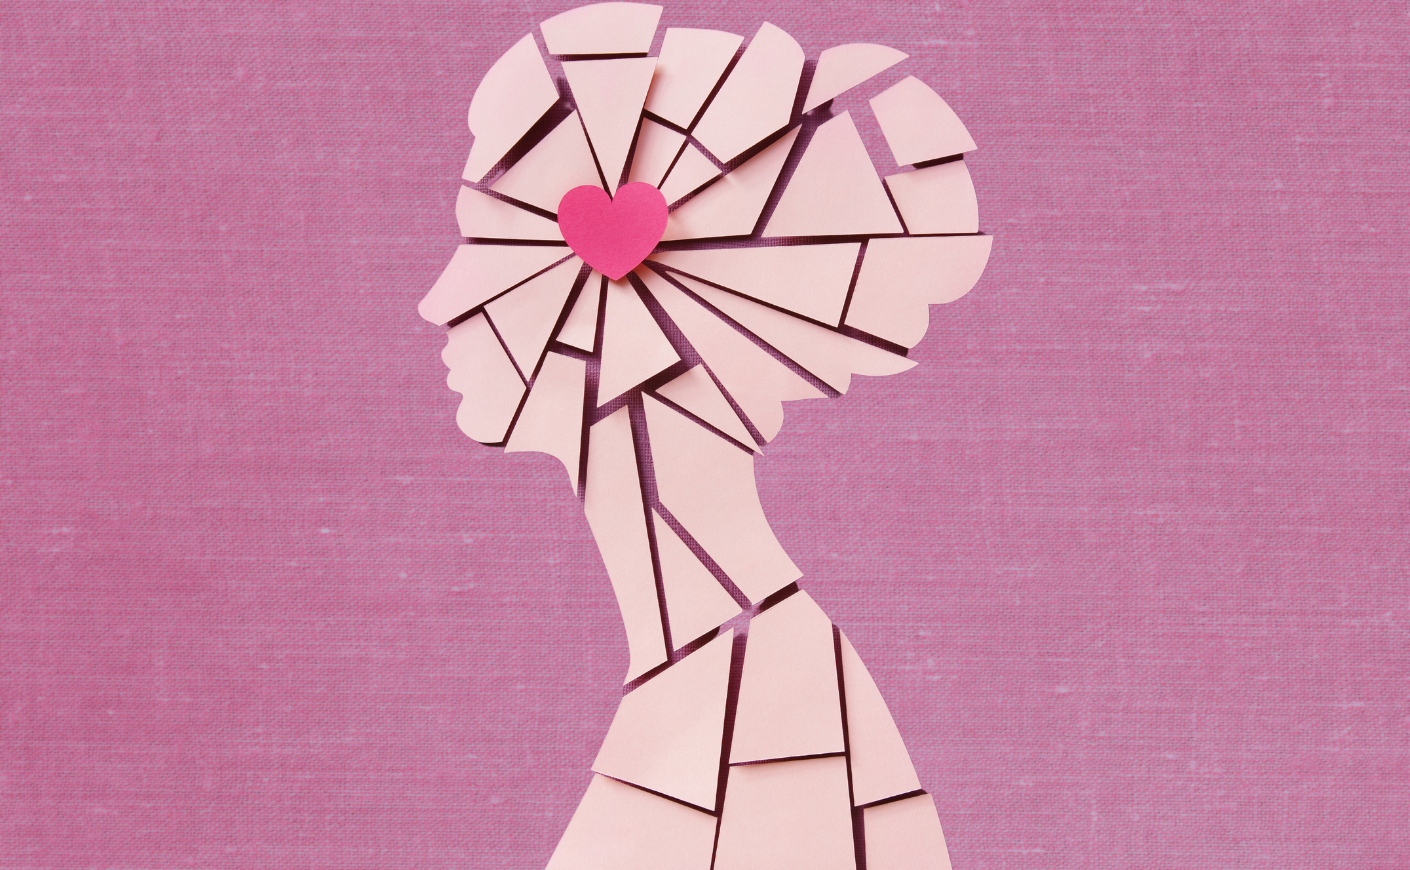 cracked silhouette of a women with a heart at the center